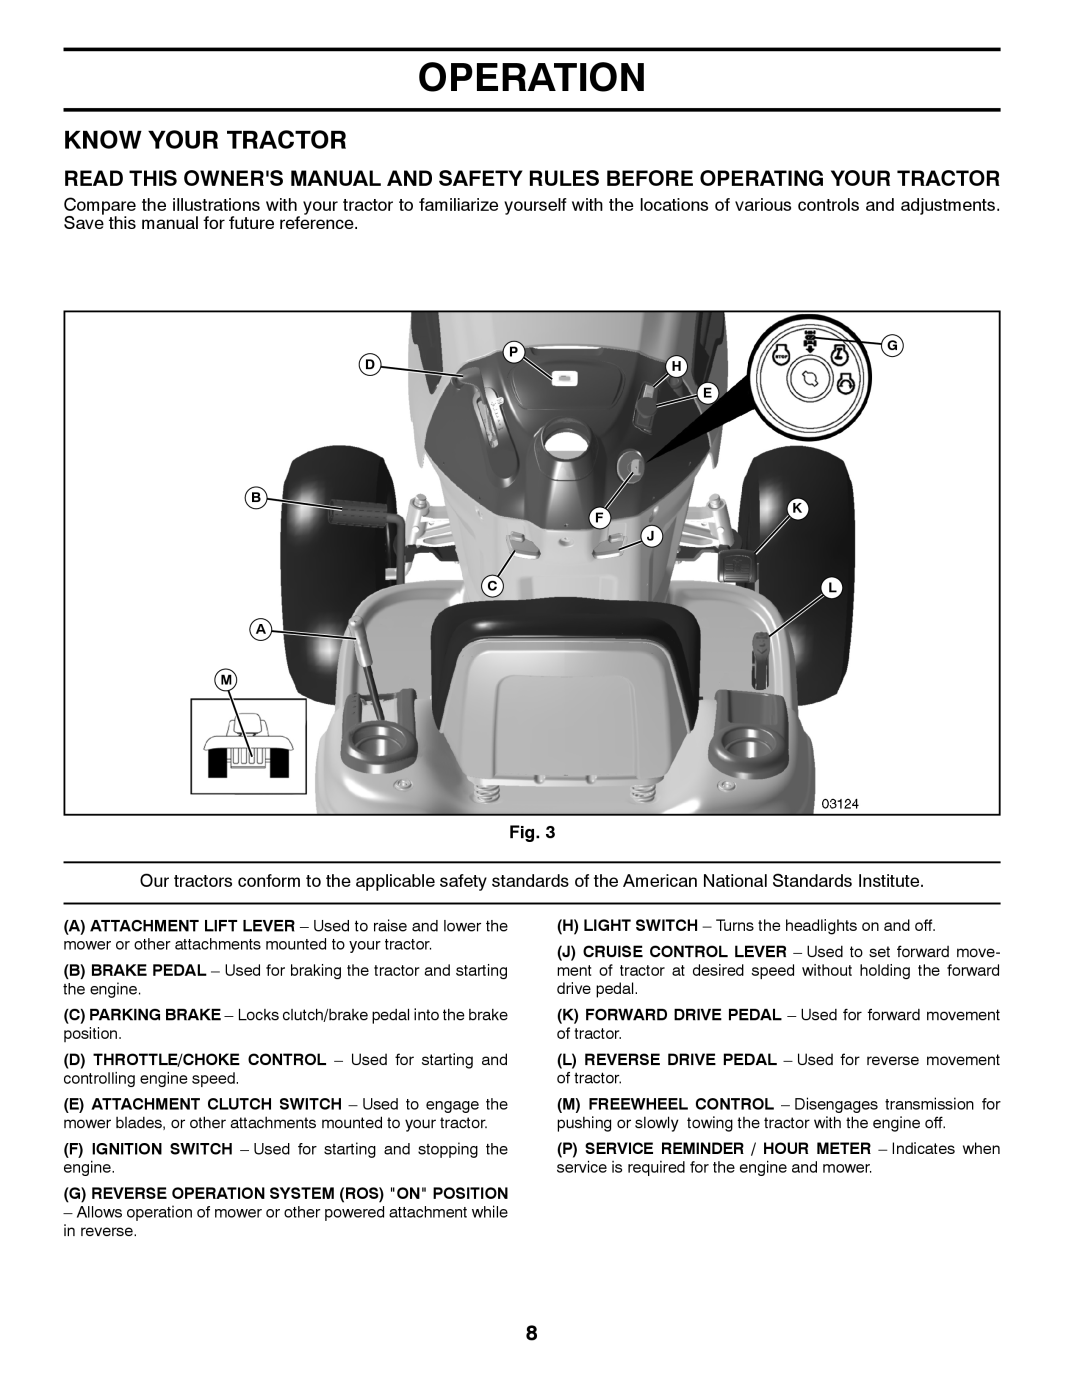 Husqvarna 917.289570, 532 43 38-61 owner manual Know Your Tractor, Operation 